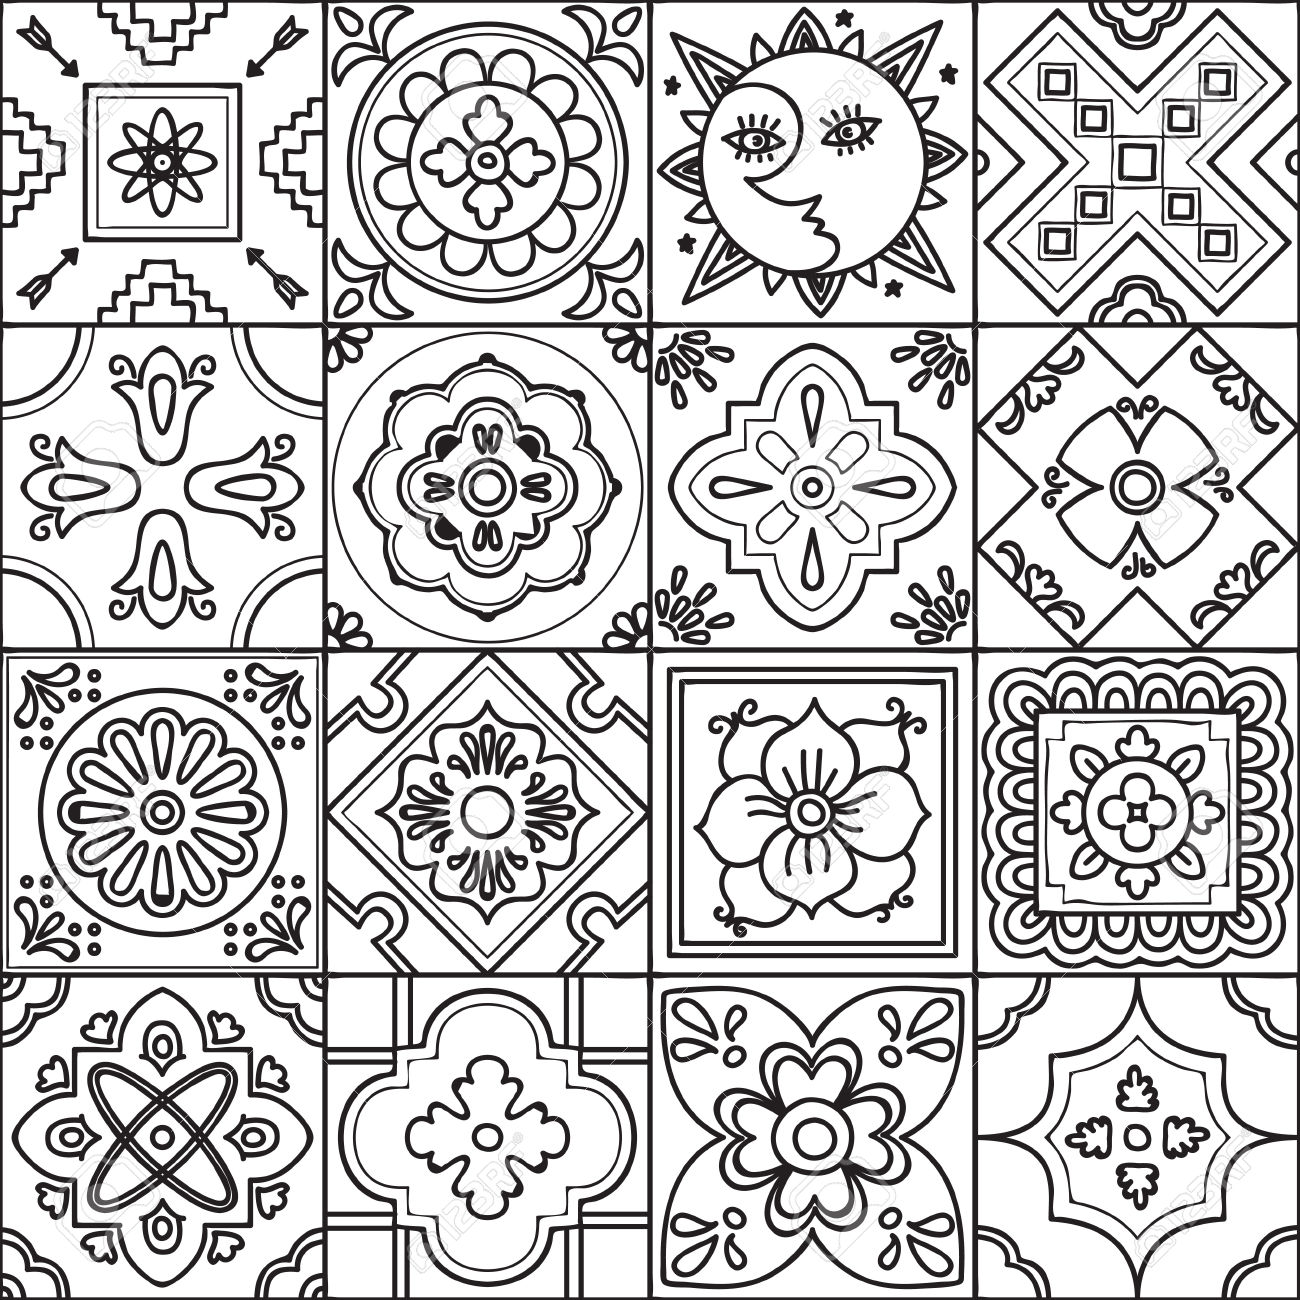 Download Tiles coloring for free - Designlooter 2020 👨‍🎨